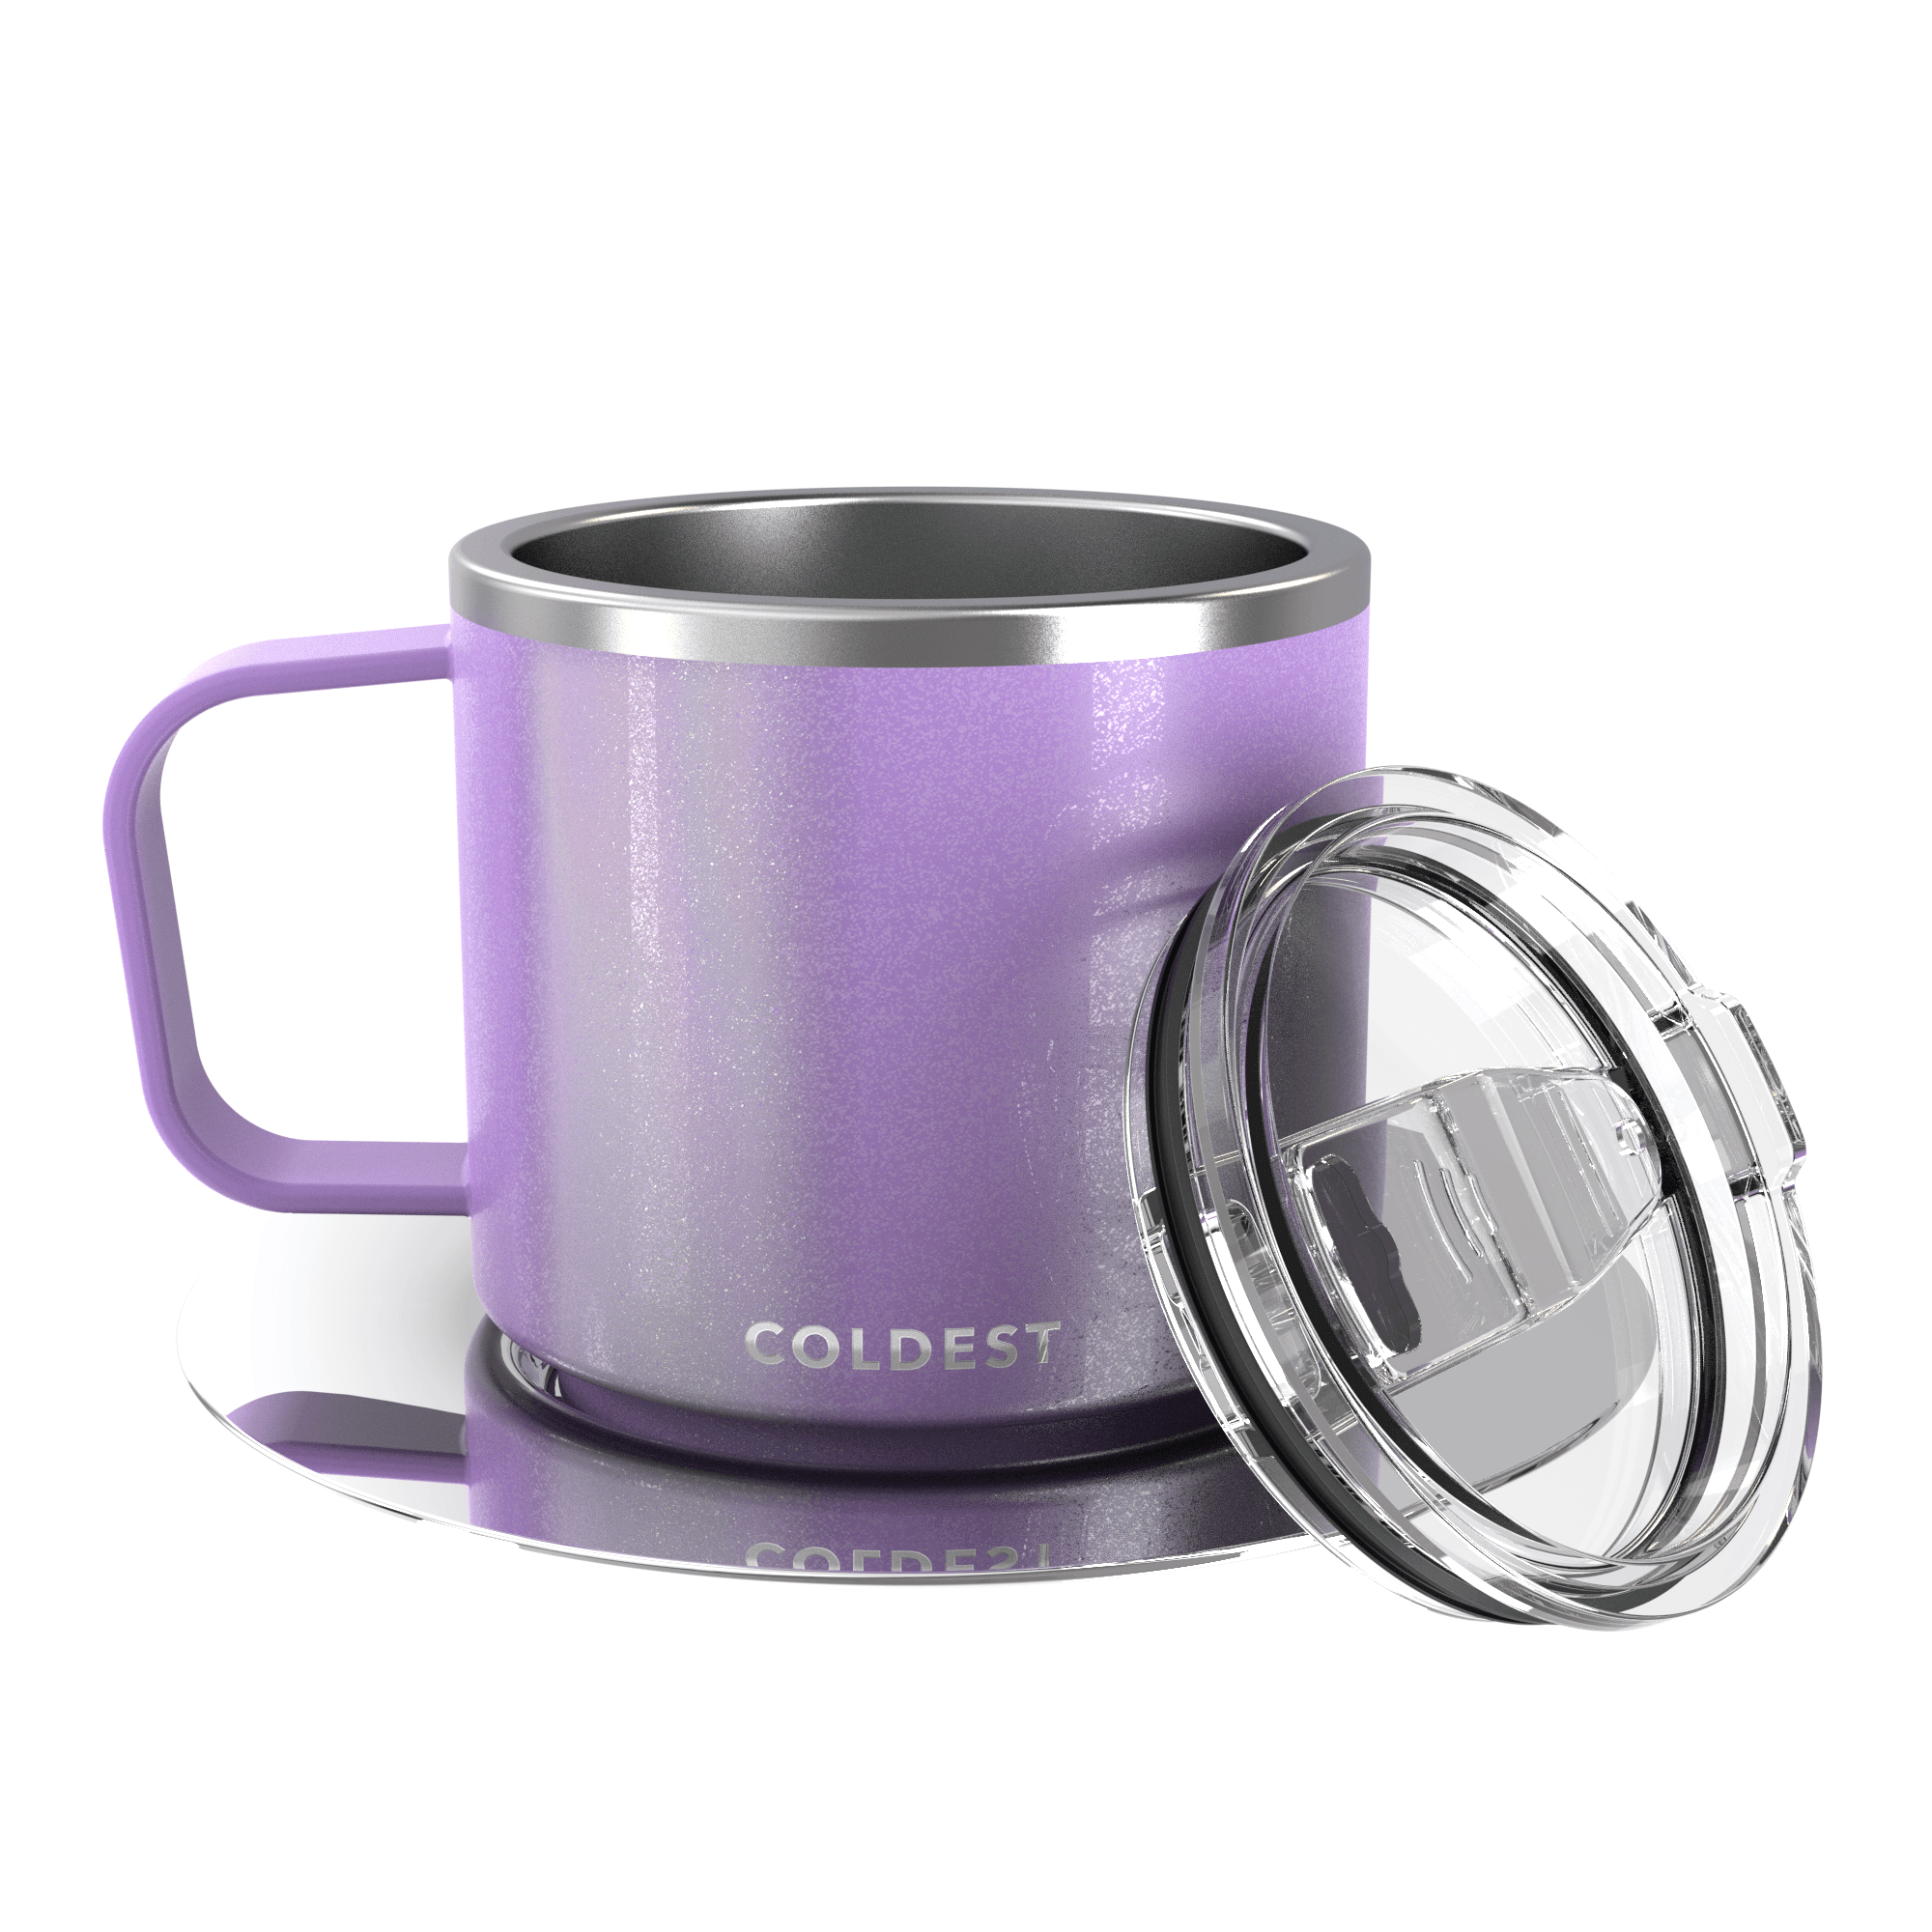 The Coldest Water Stackable Insulated Espresso Cup with Saucer - Insulated  Triple Wall Stainless Ste…See more The Coldest Water Stackable Insulated